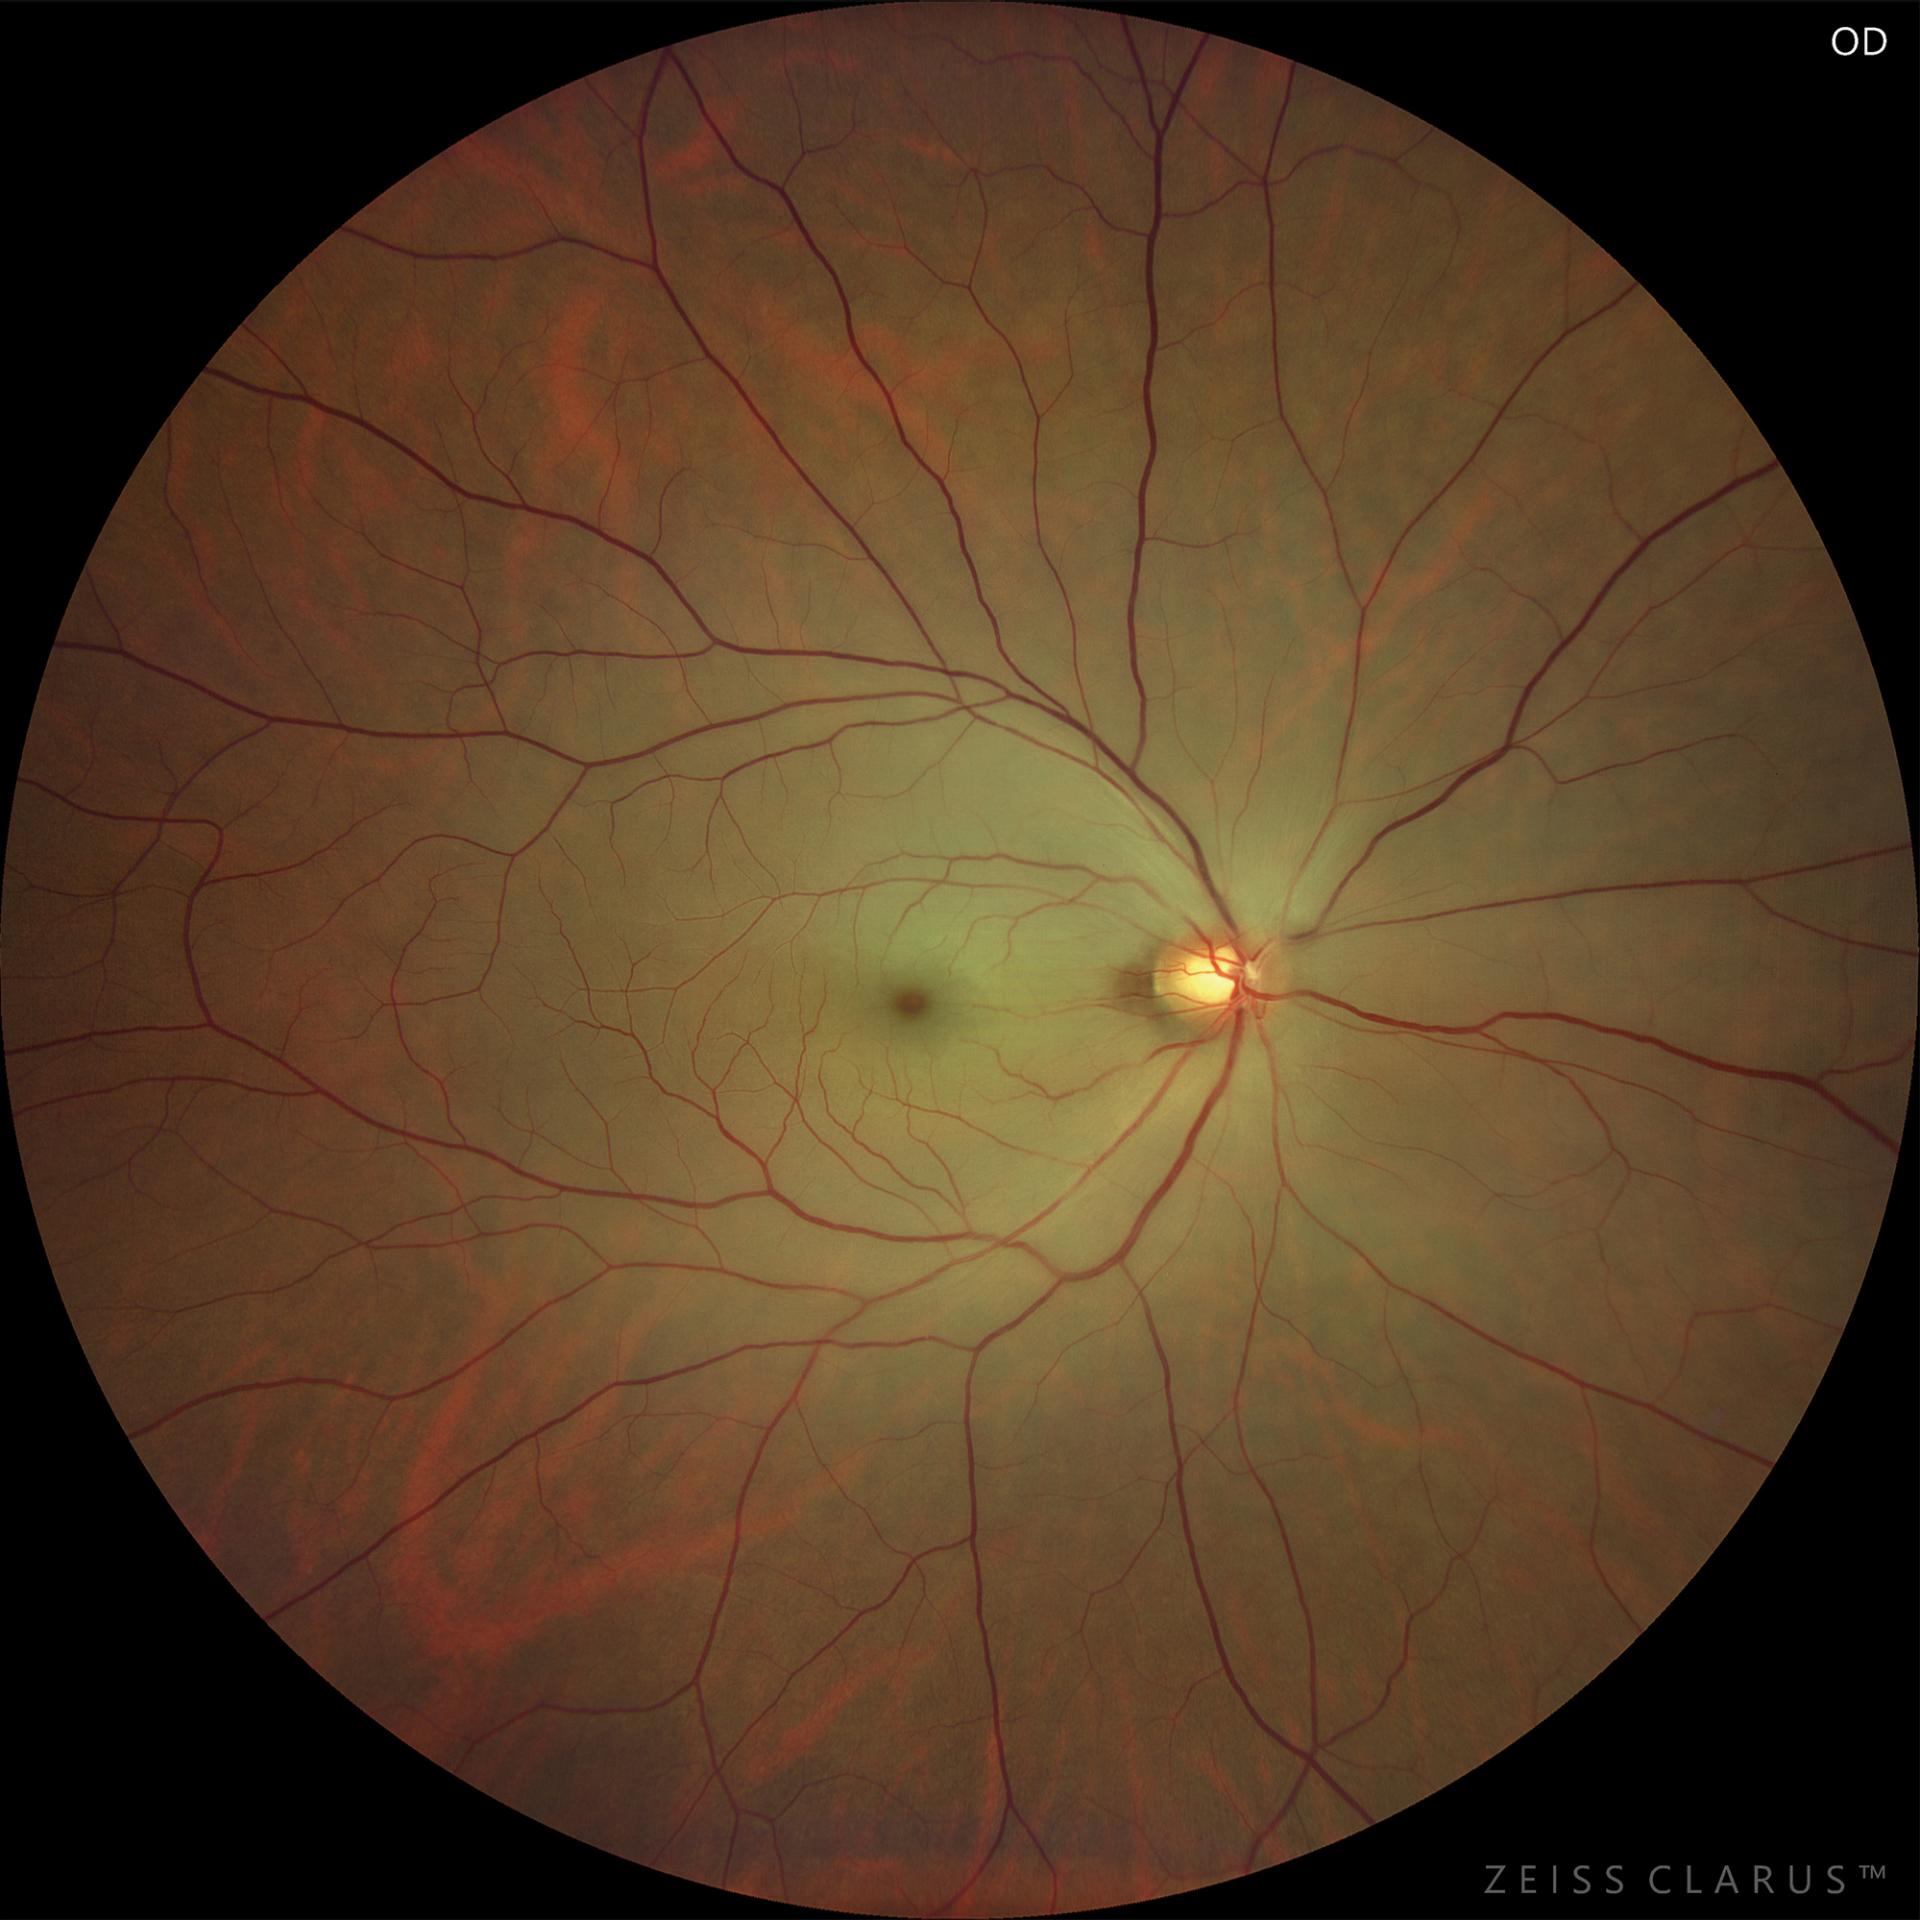 WF 133° magnified image of the macula. The entire fundus is milky white and cloudy because the inner retinal layer nourished by the interrupted retinal blood vessels is subject to ischemic necrosis. Cherry-red spots and edema in the macula are also observed.